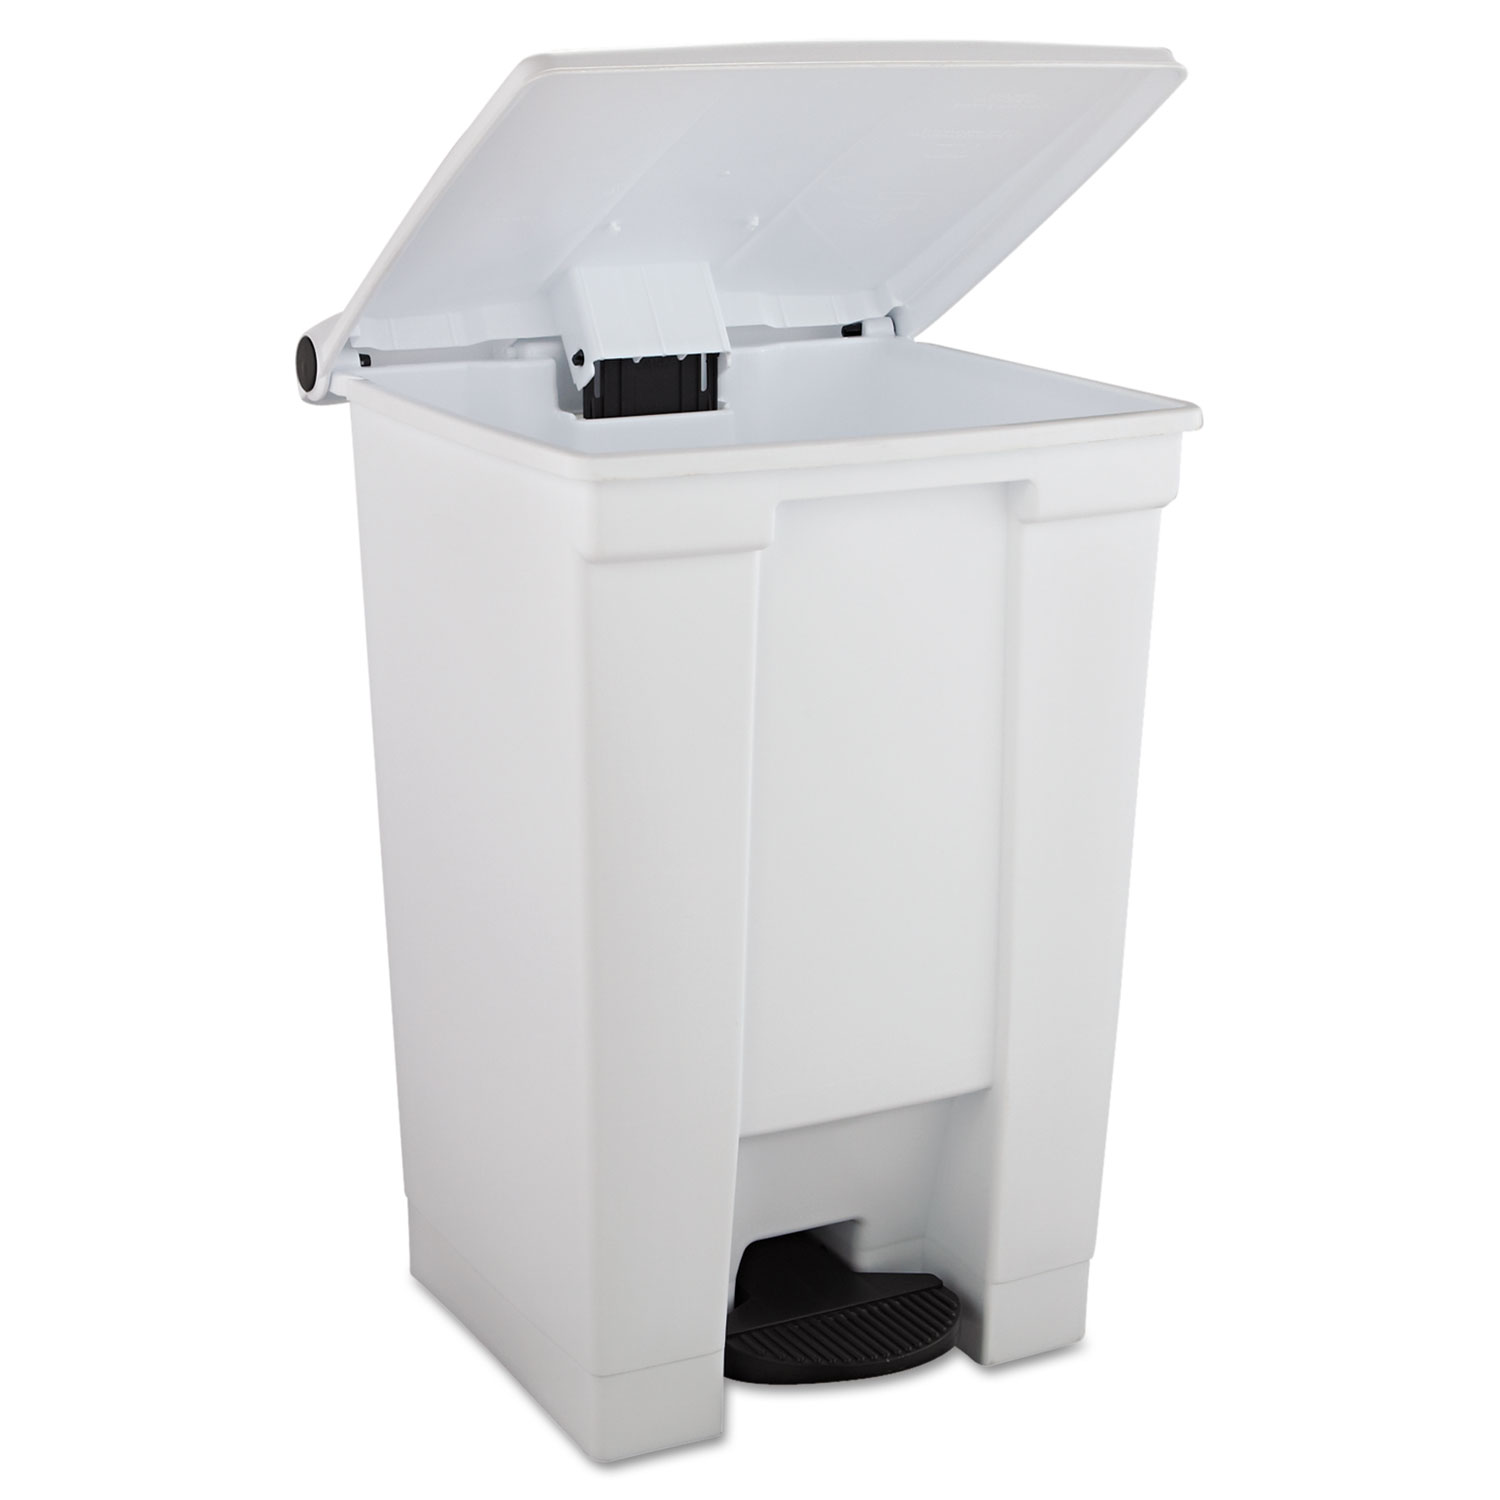 Indoor Utility Step-On Waste Container, Square, Plastic, 12gal, White